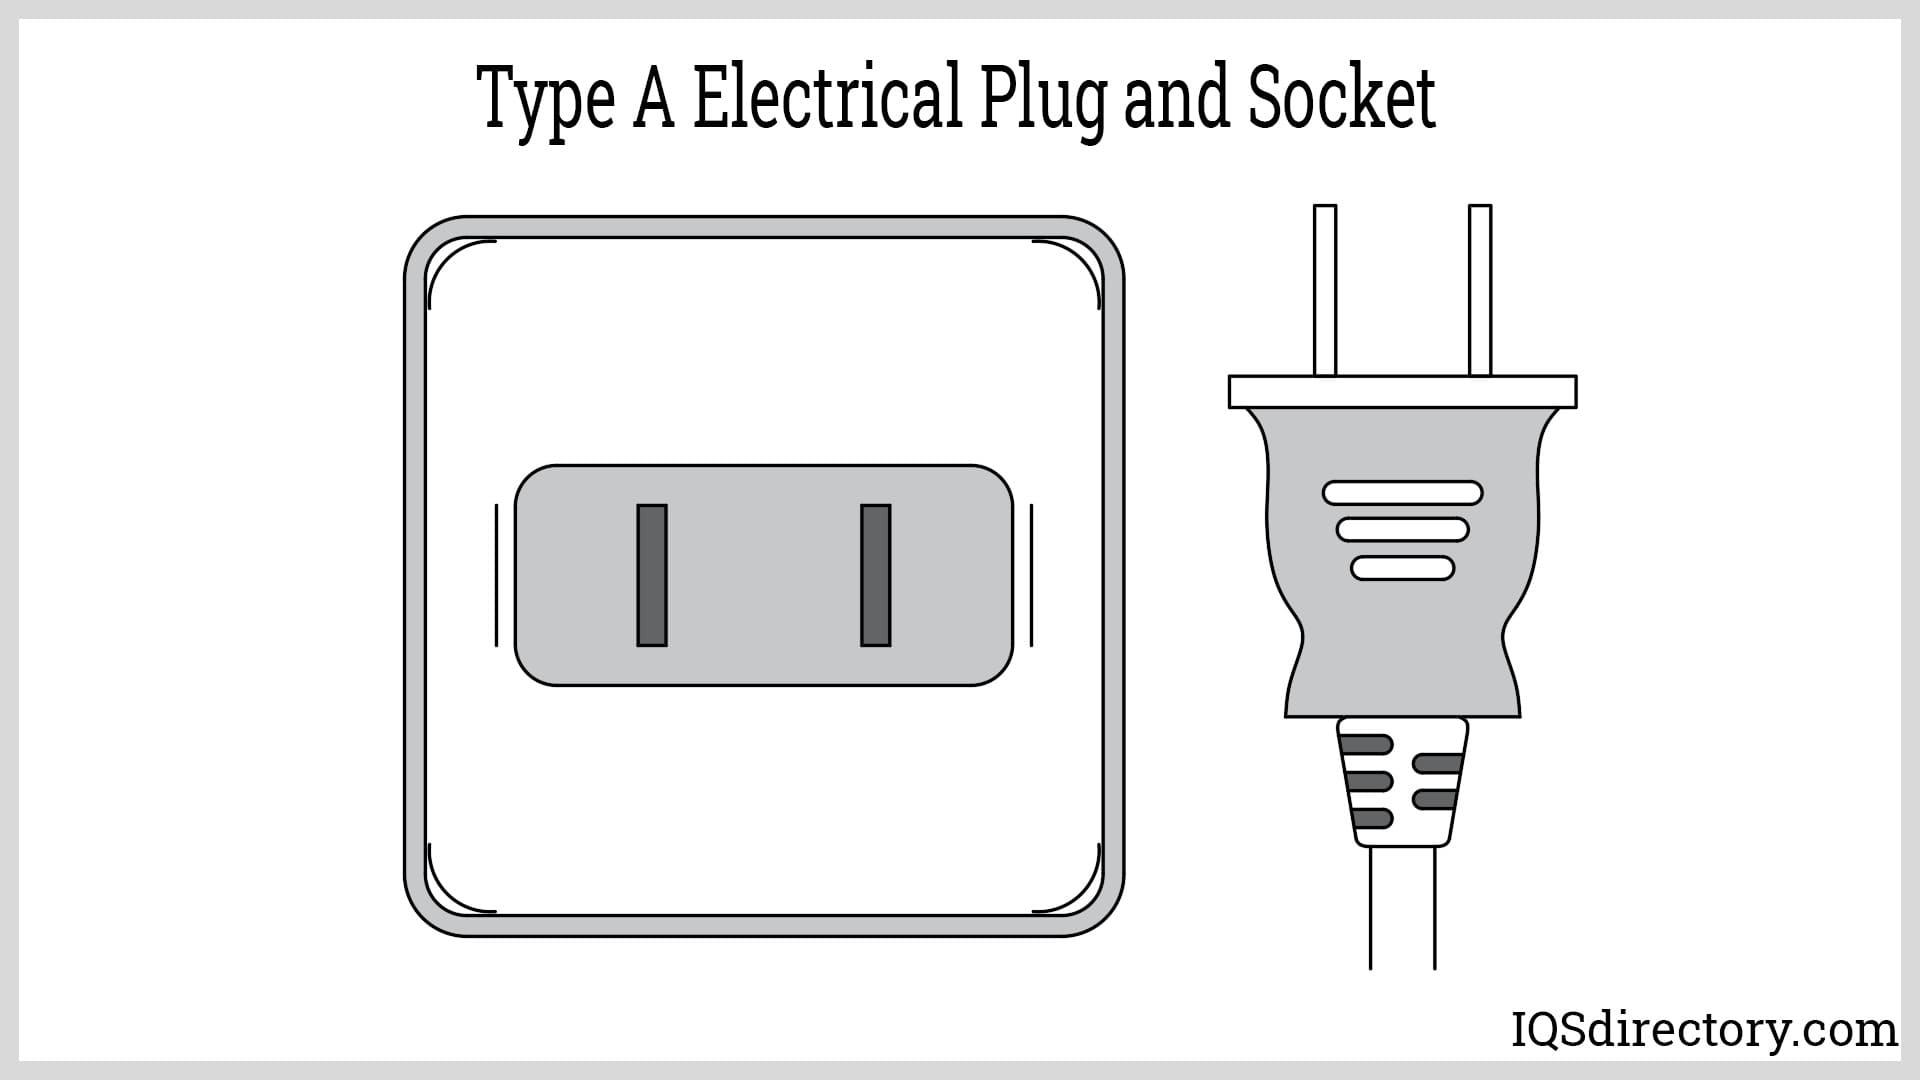 Type A Electrical Plug and Socket